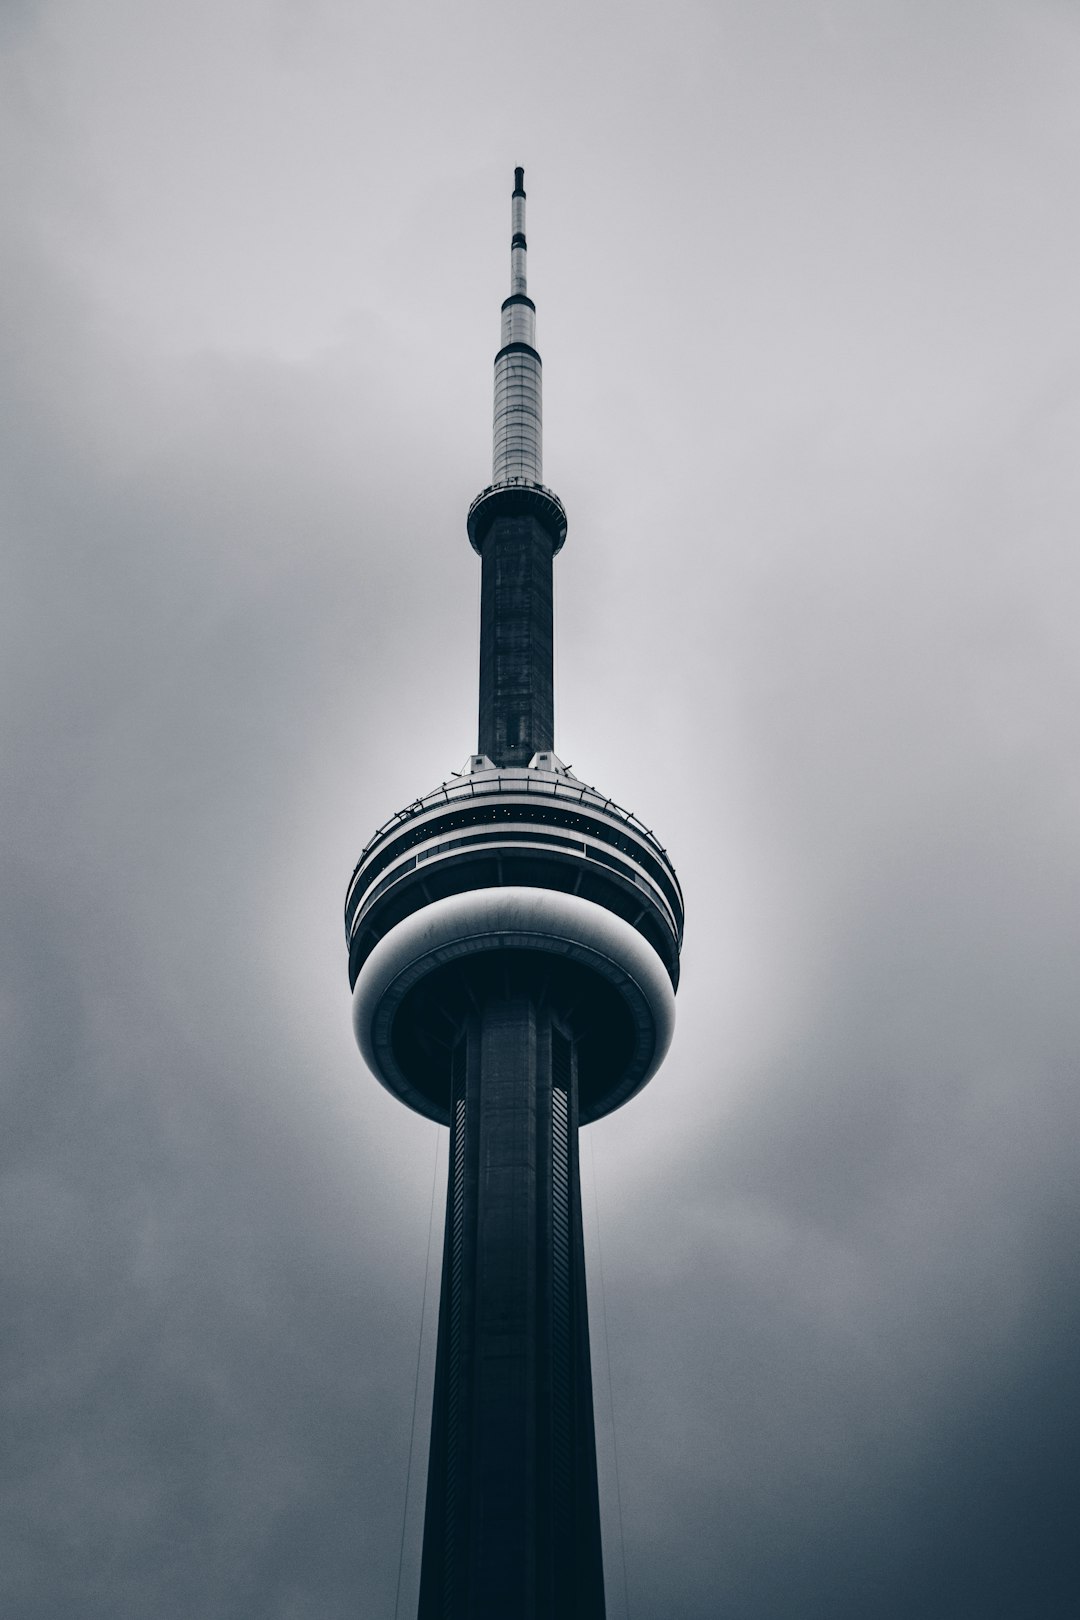 travelers stories about Landmark in Toronto, Canada